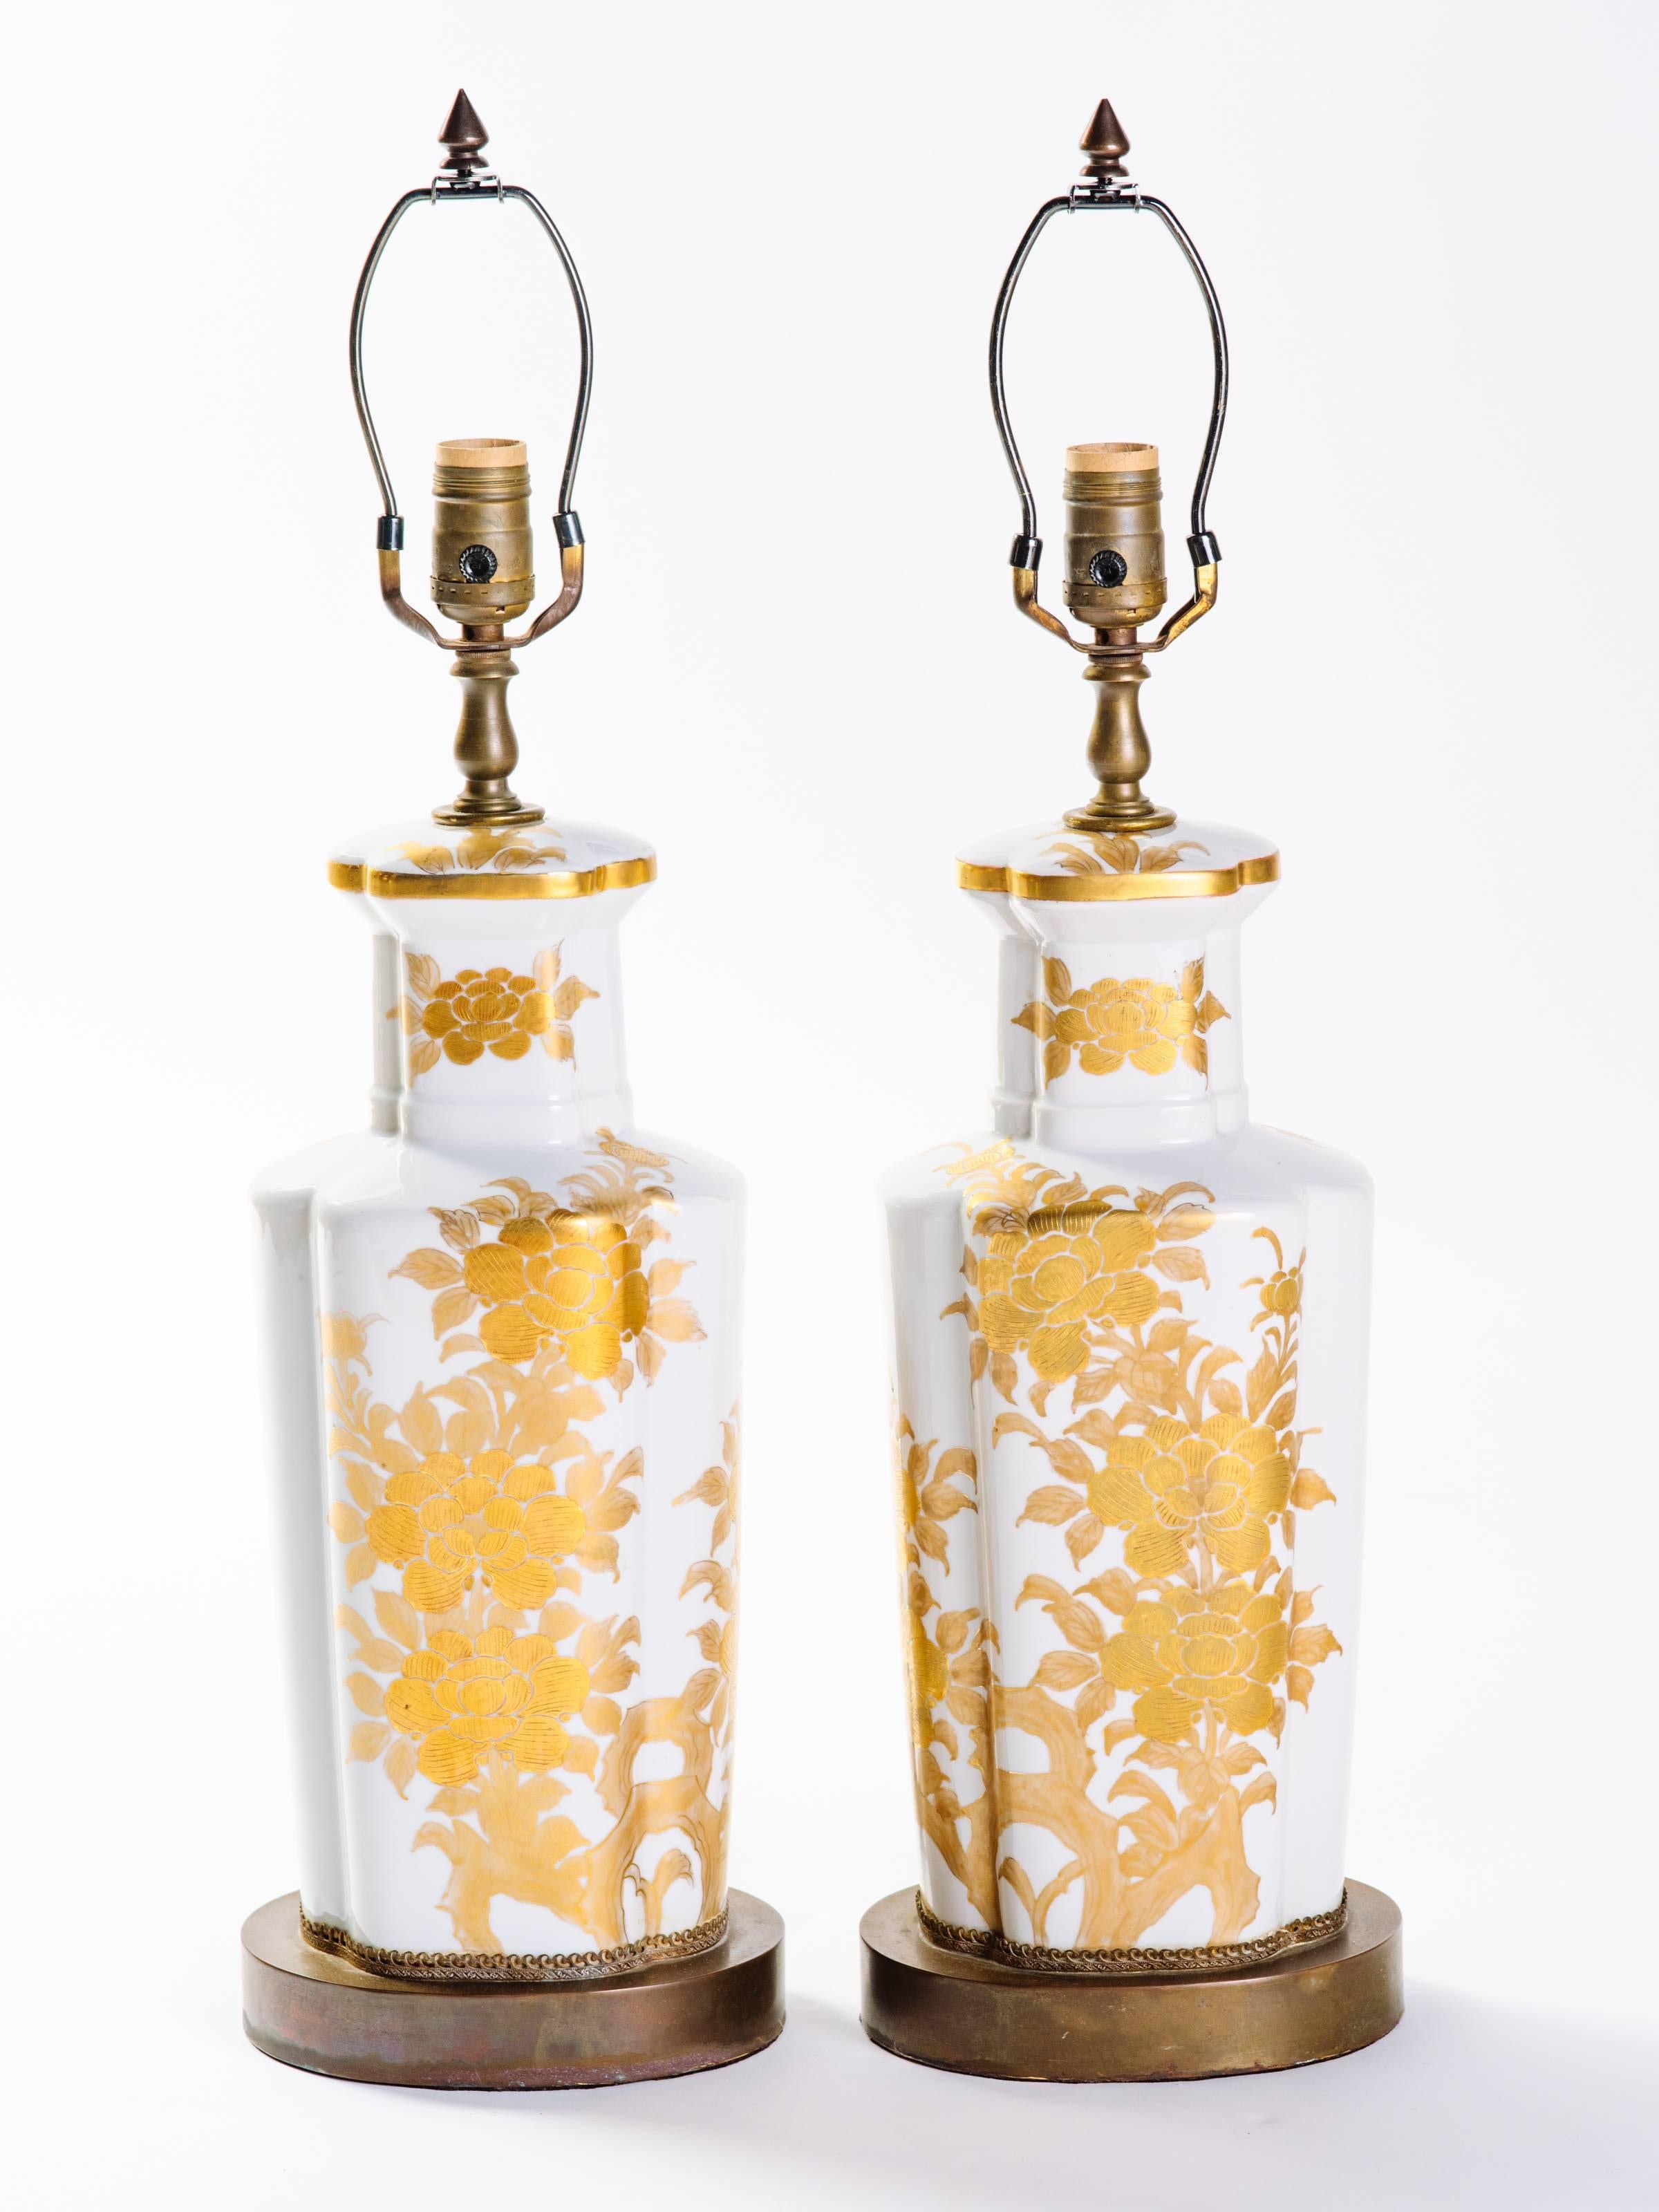 Pair of elegant Japanese porcelain lamps with hand-painted floral motif. Mid-Century lamps have white glaze finish with gold leaf designs, and hand-forged bronze base and fittings. Shown with custom narrow drum shade in silk.